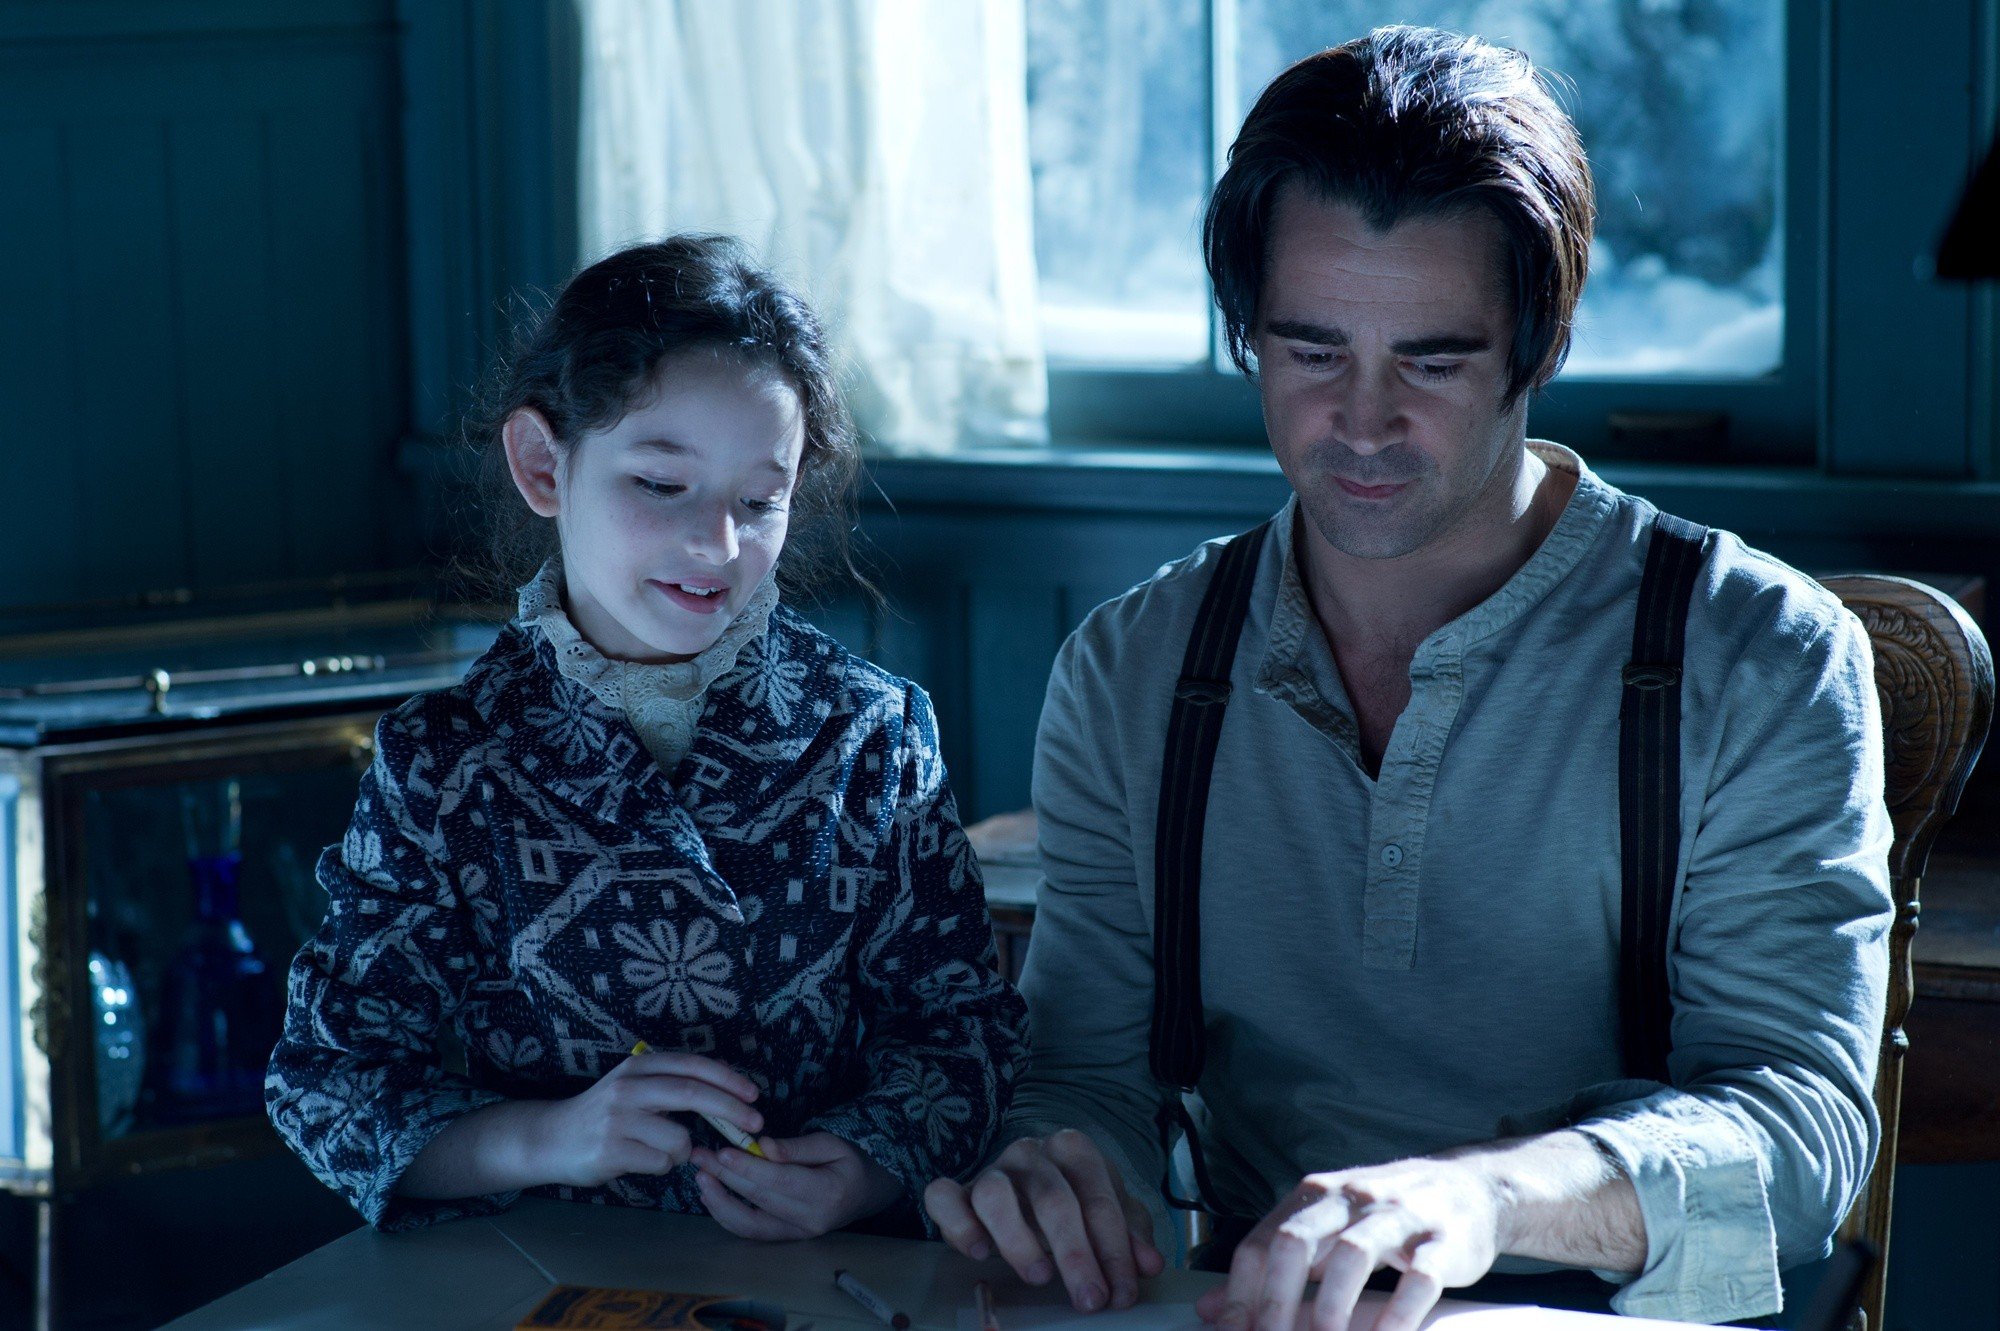 Mckayla Twiggs stars as Young Willa and Colin Farrell stars as Peter Lake in Warner Bros. Pictures' Winter's Tale (2014)